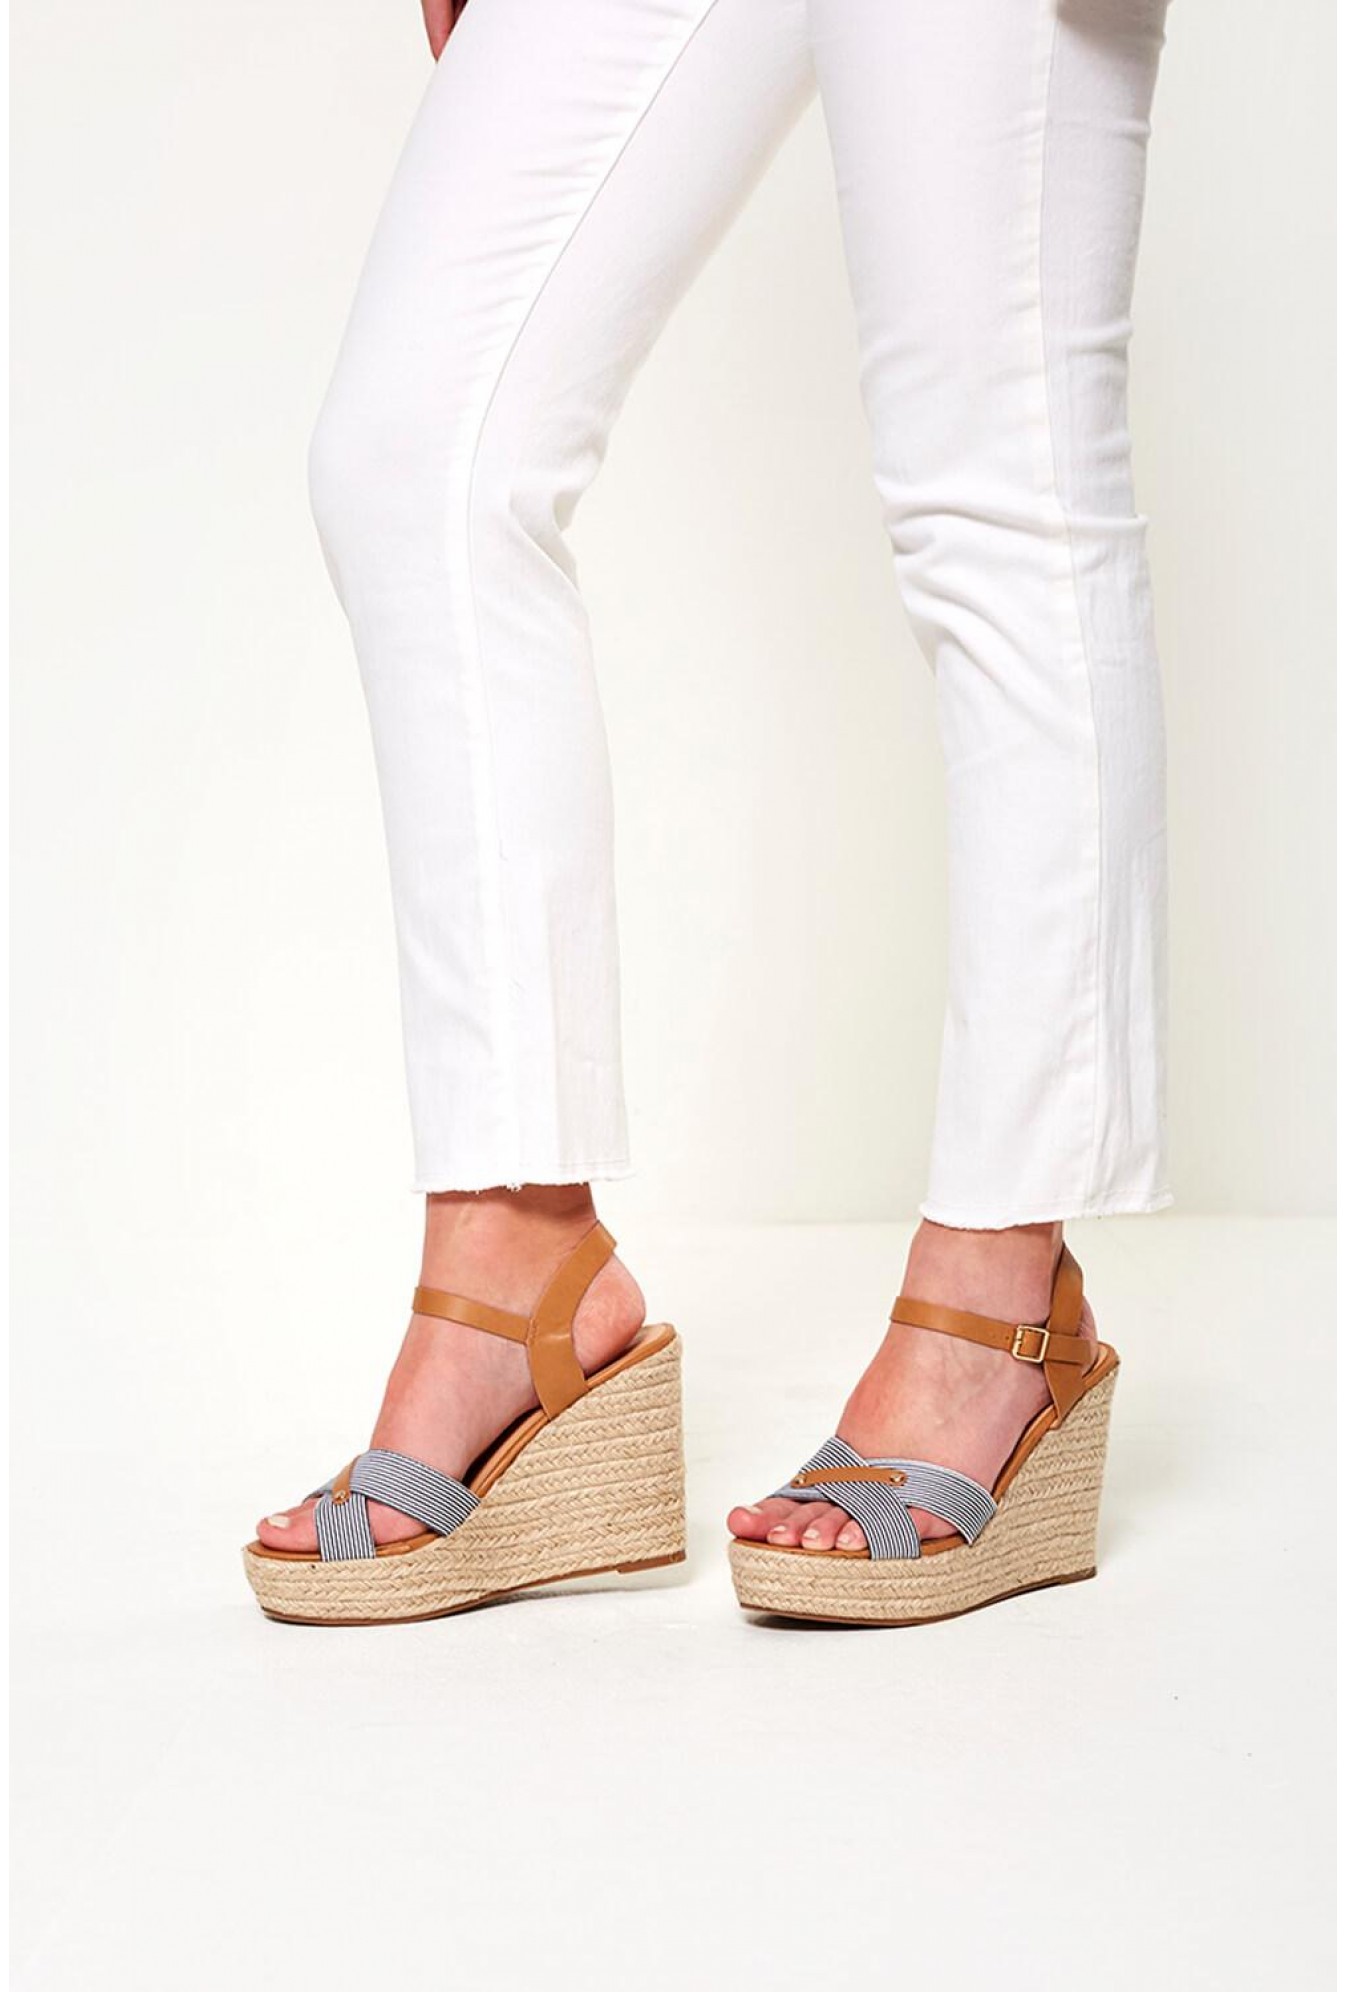 No Doubt Navy Stripe Espadrille Wedges | iCLOTHING